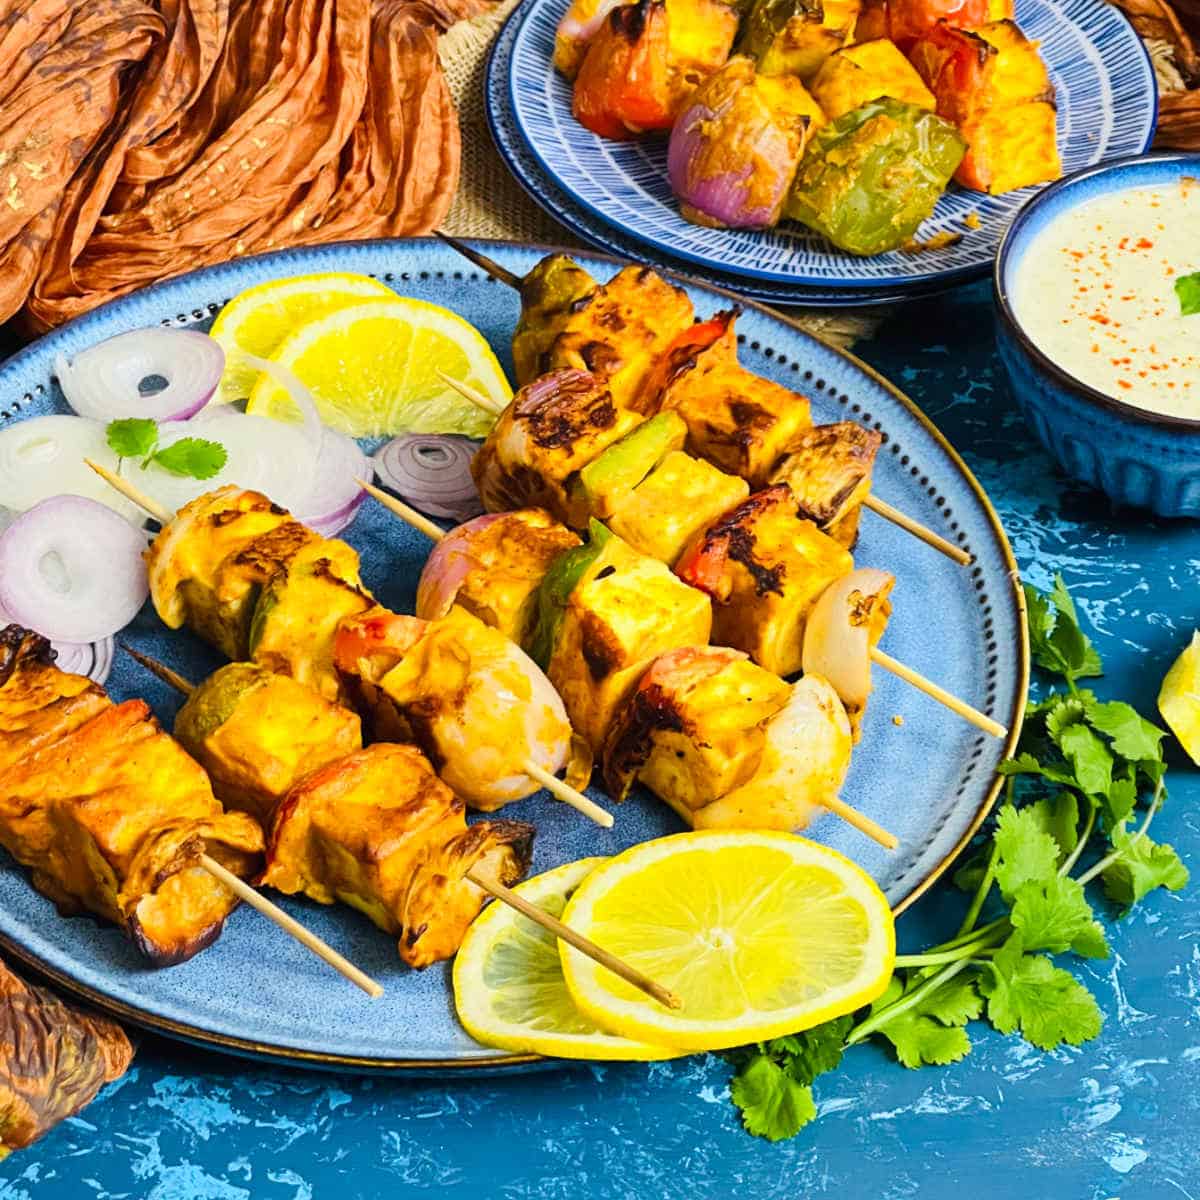 Paneer tikka threaded in skewers placed in a blue plate and served with mint chutney.